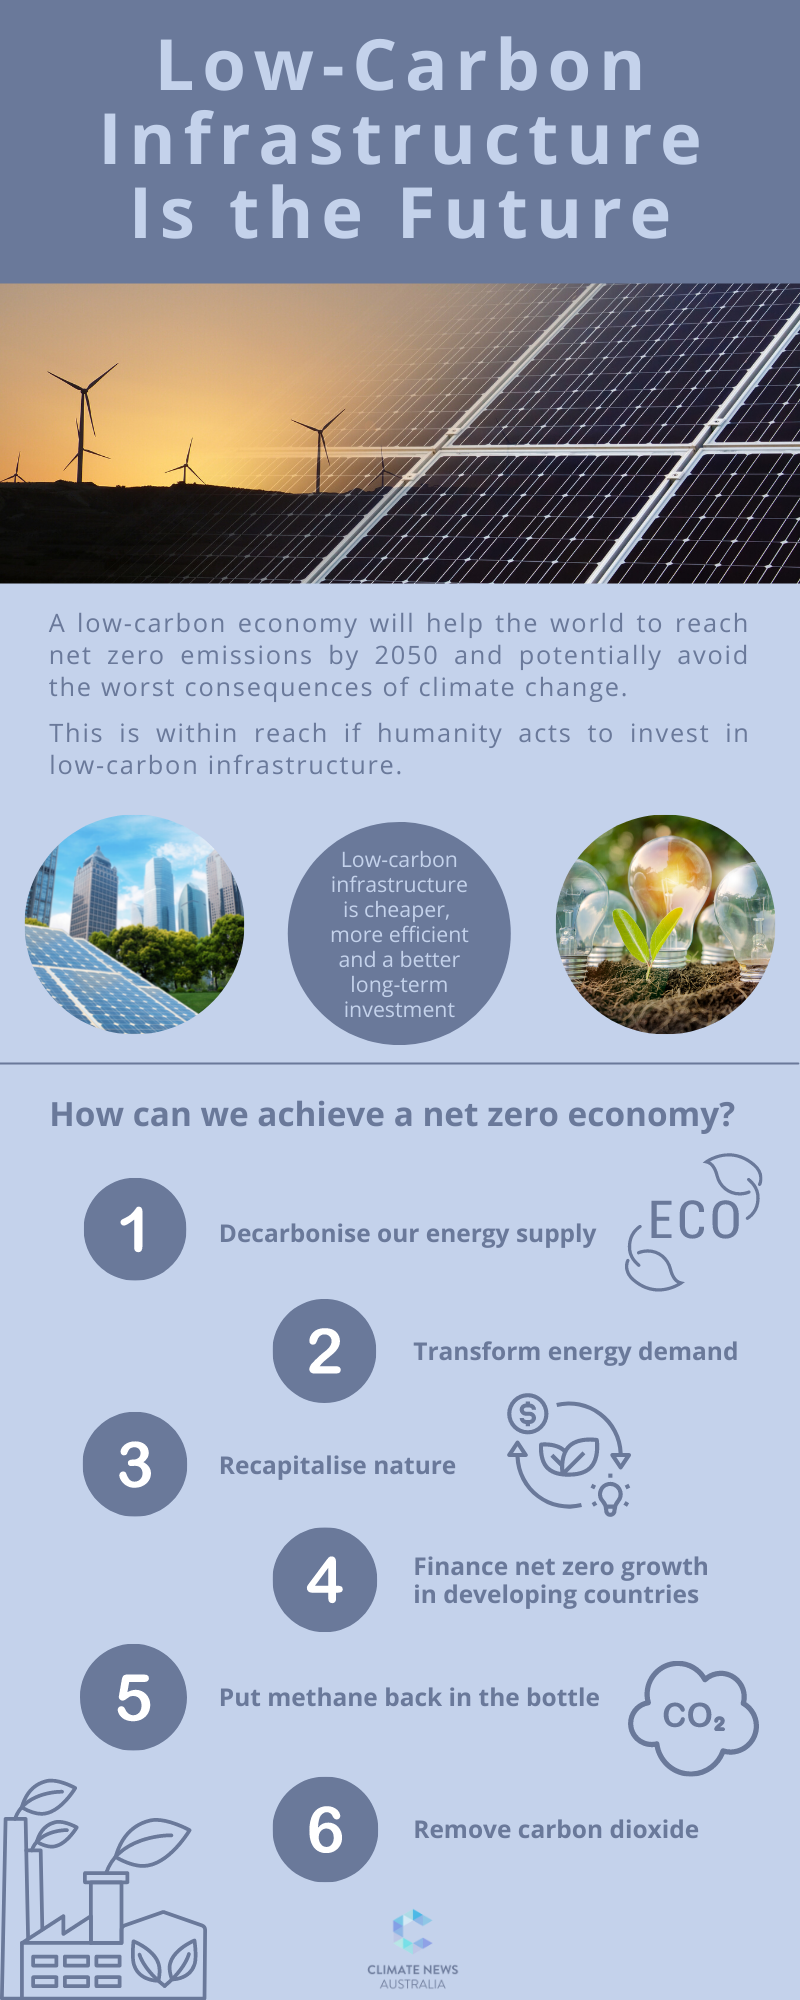 Low Carbon Infrastructure Is the Future